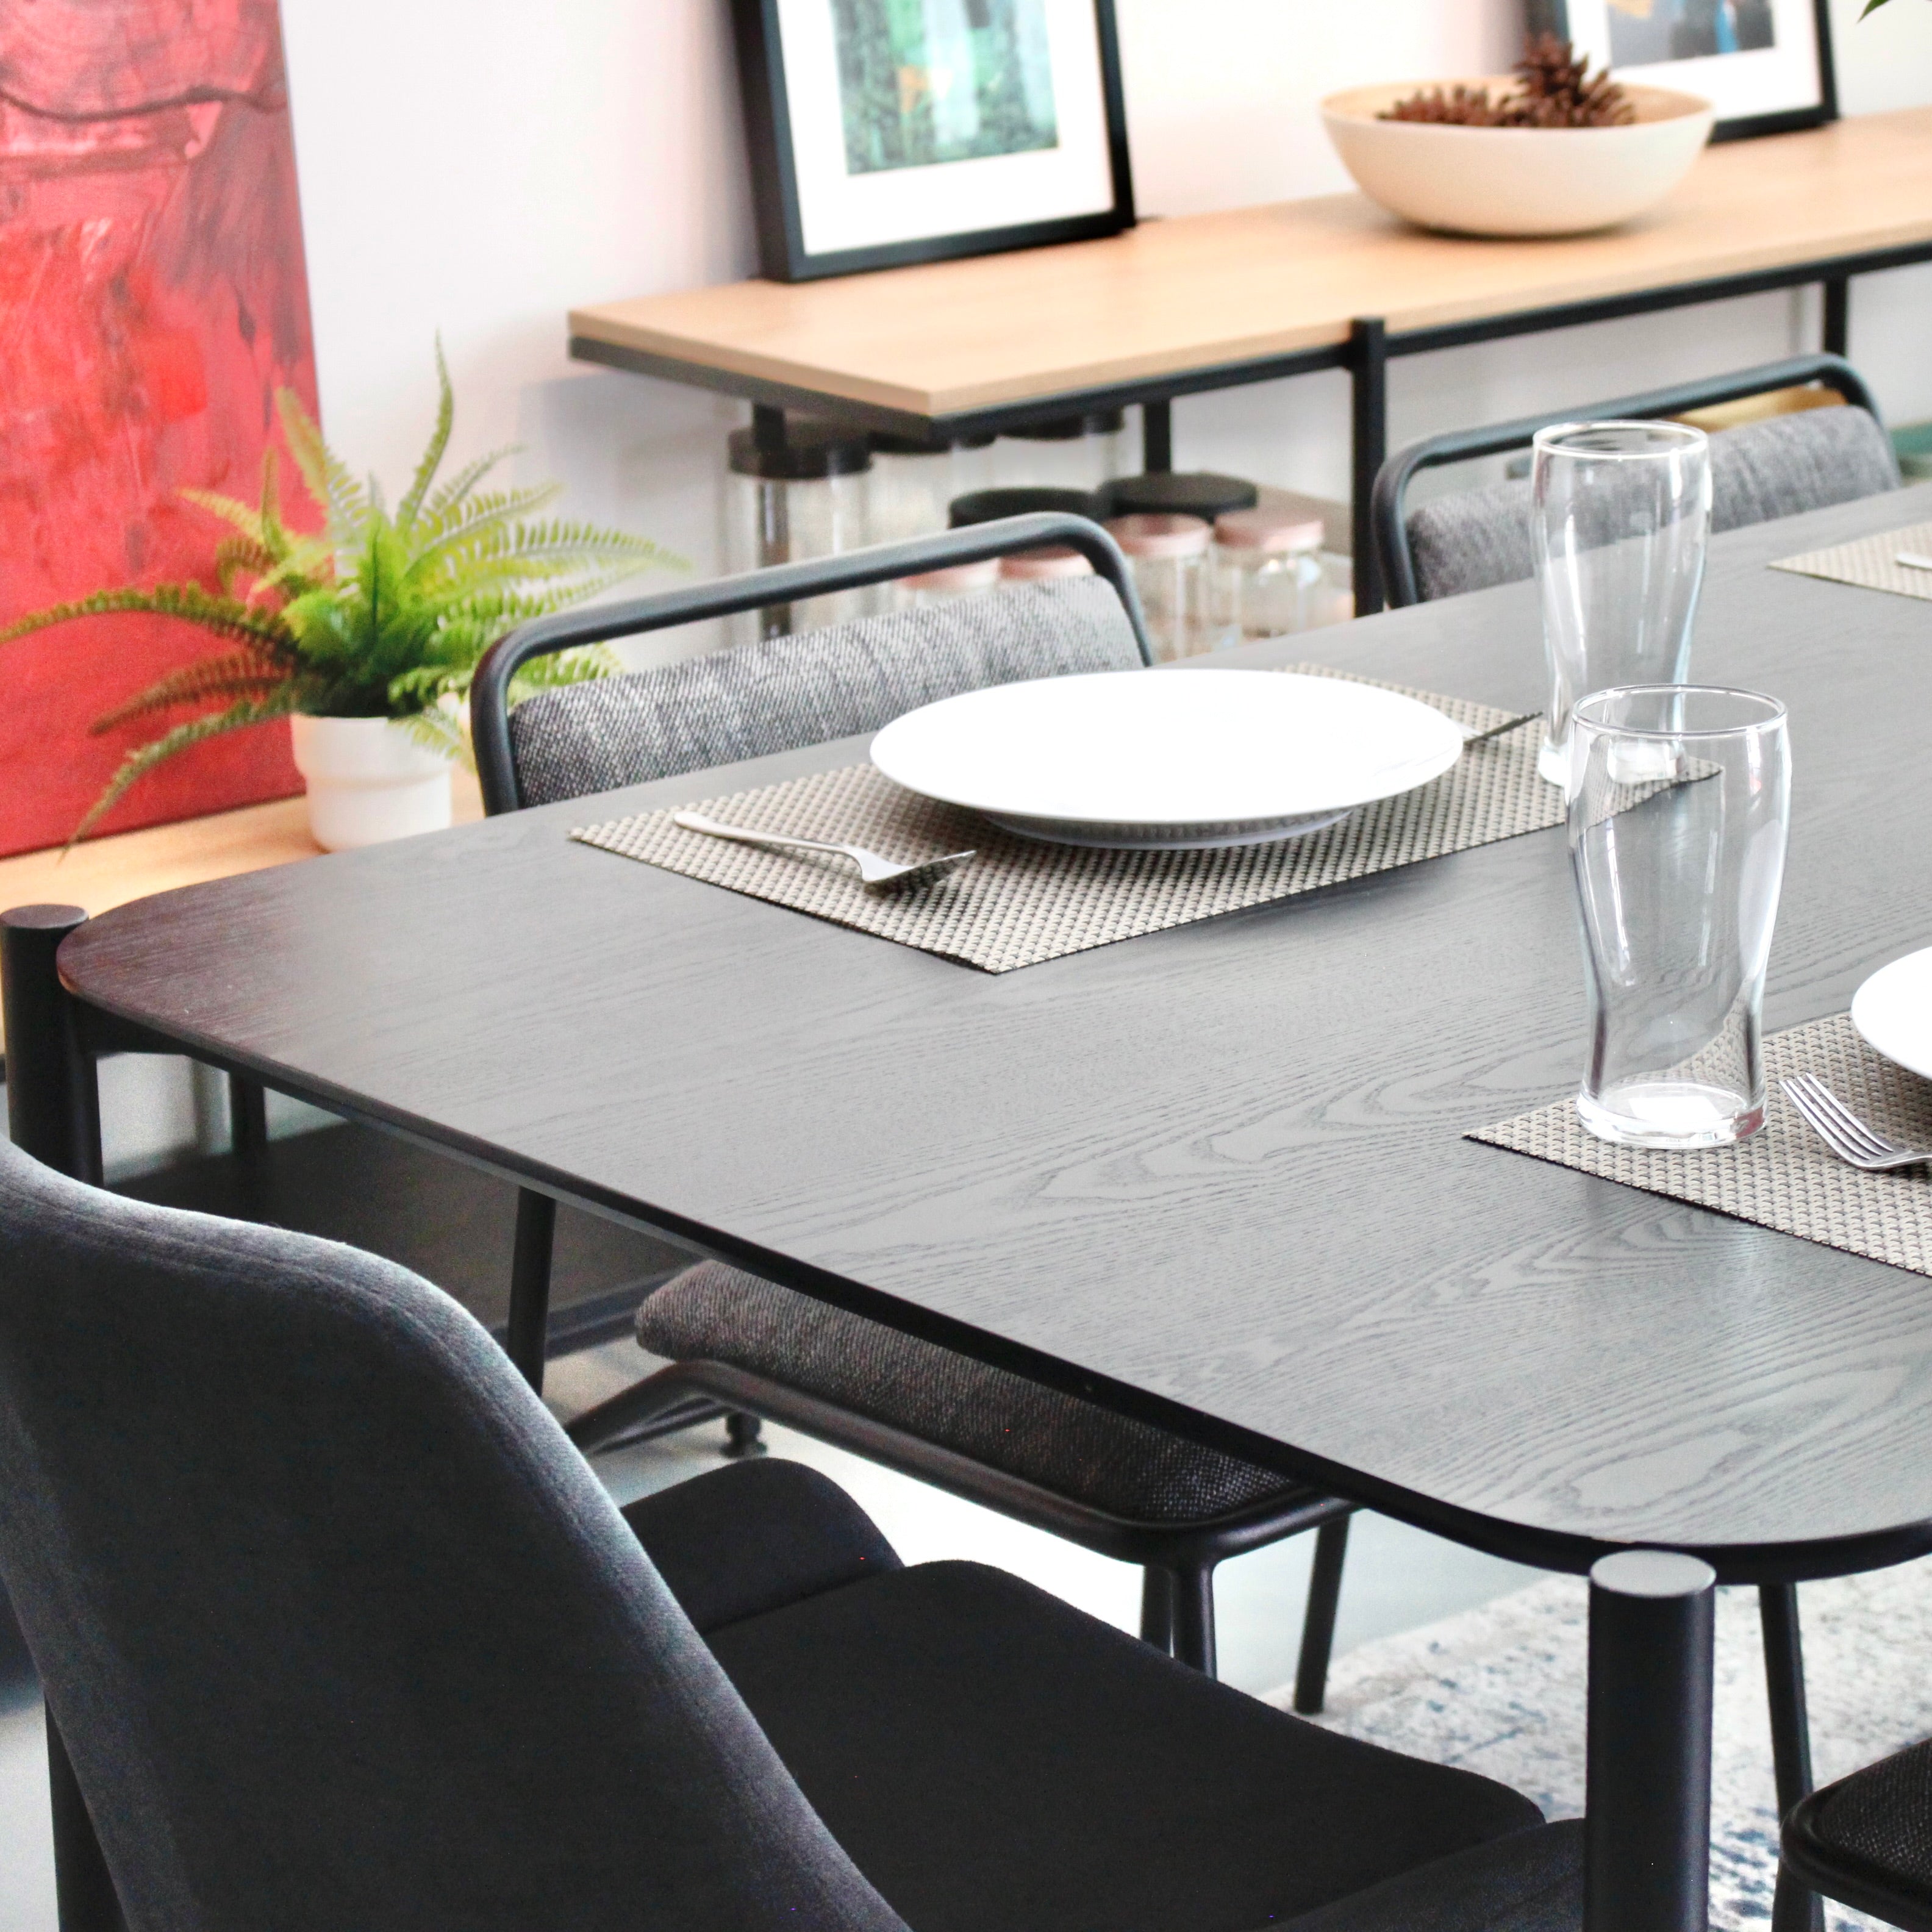 TANA Dining Table All Black W1785 mm Exhibit Sales at Seremban 2 Offline Store